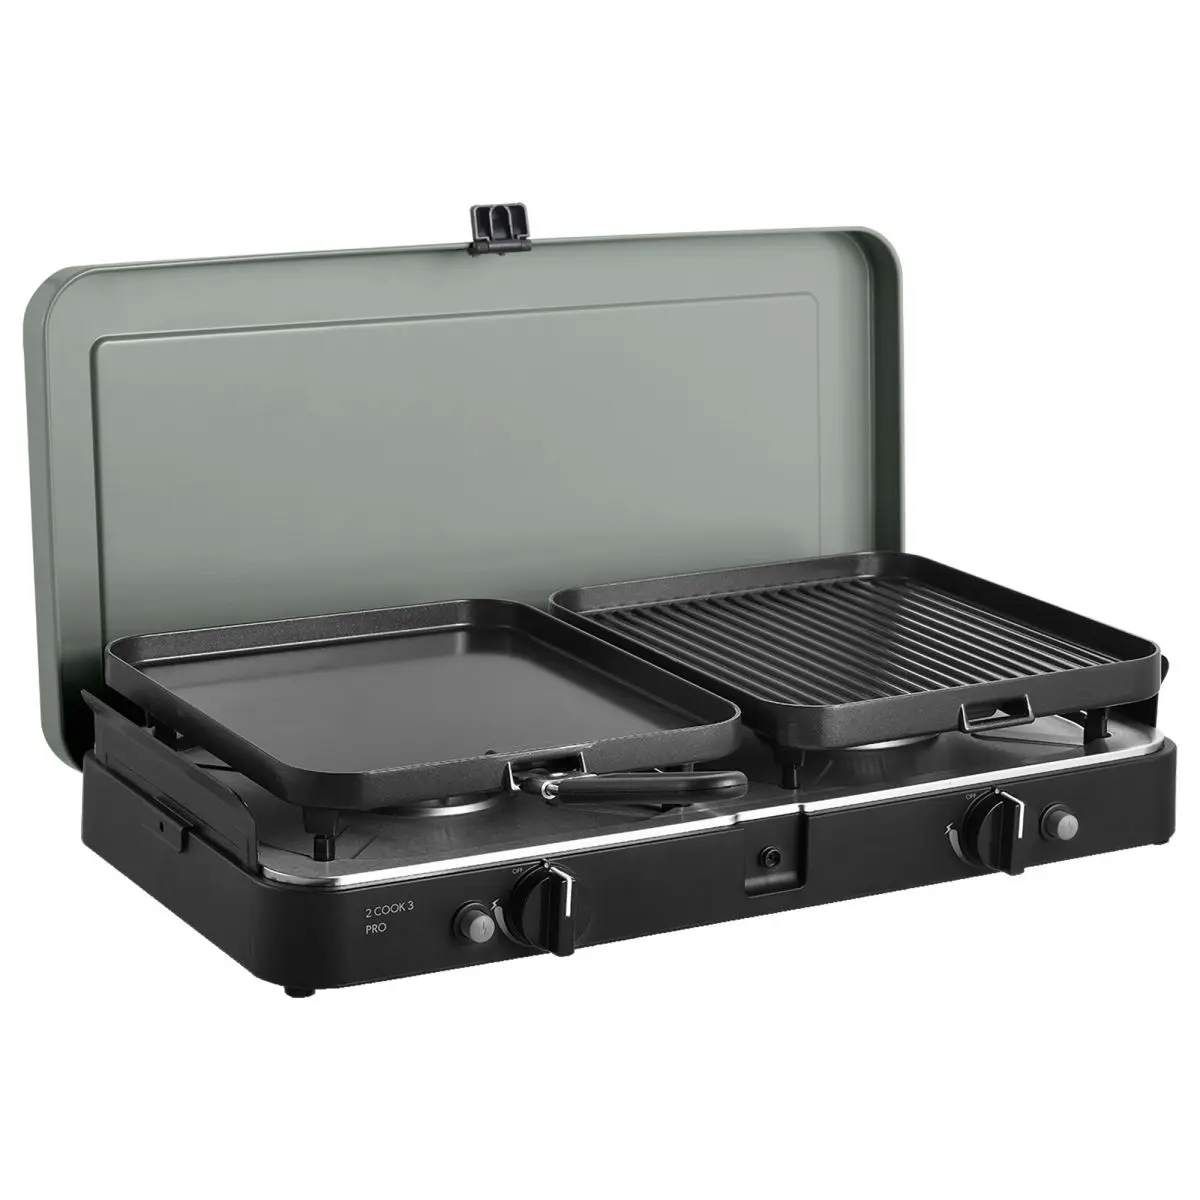 2-Cook 3 Pro Deluxe - 30 mbar